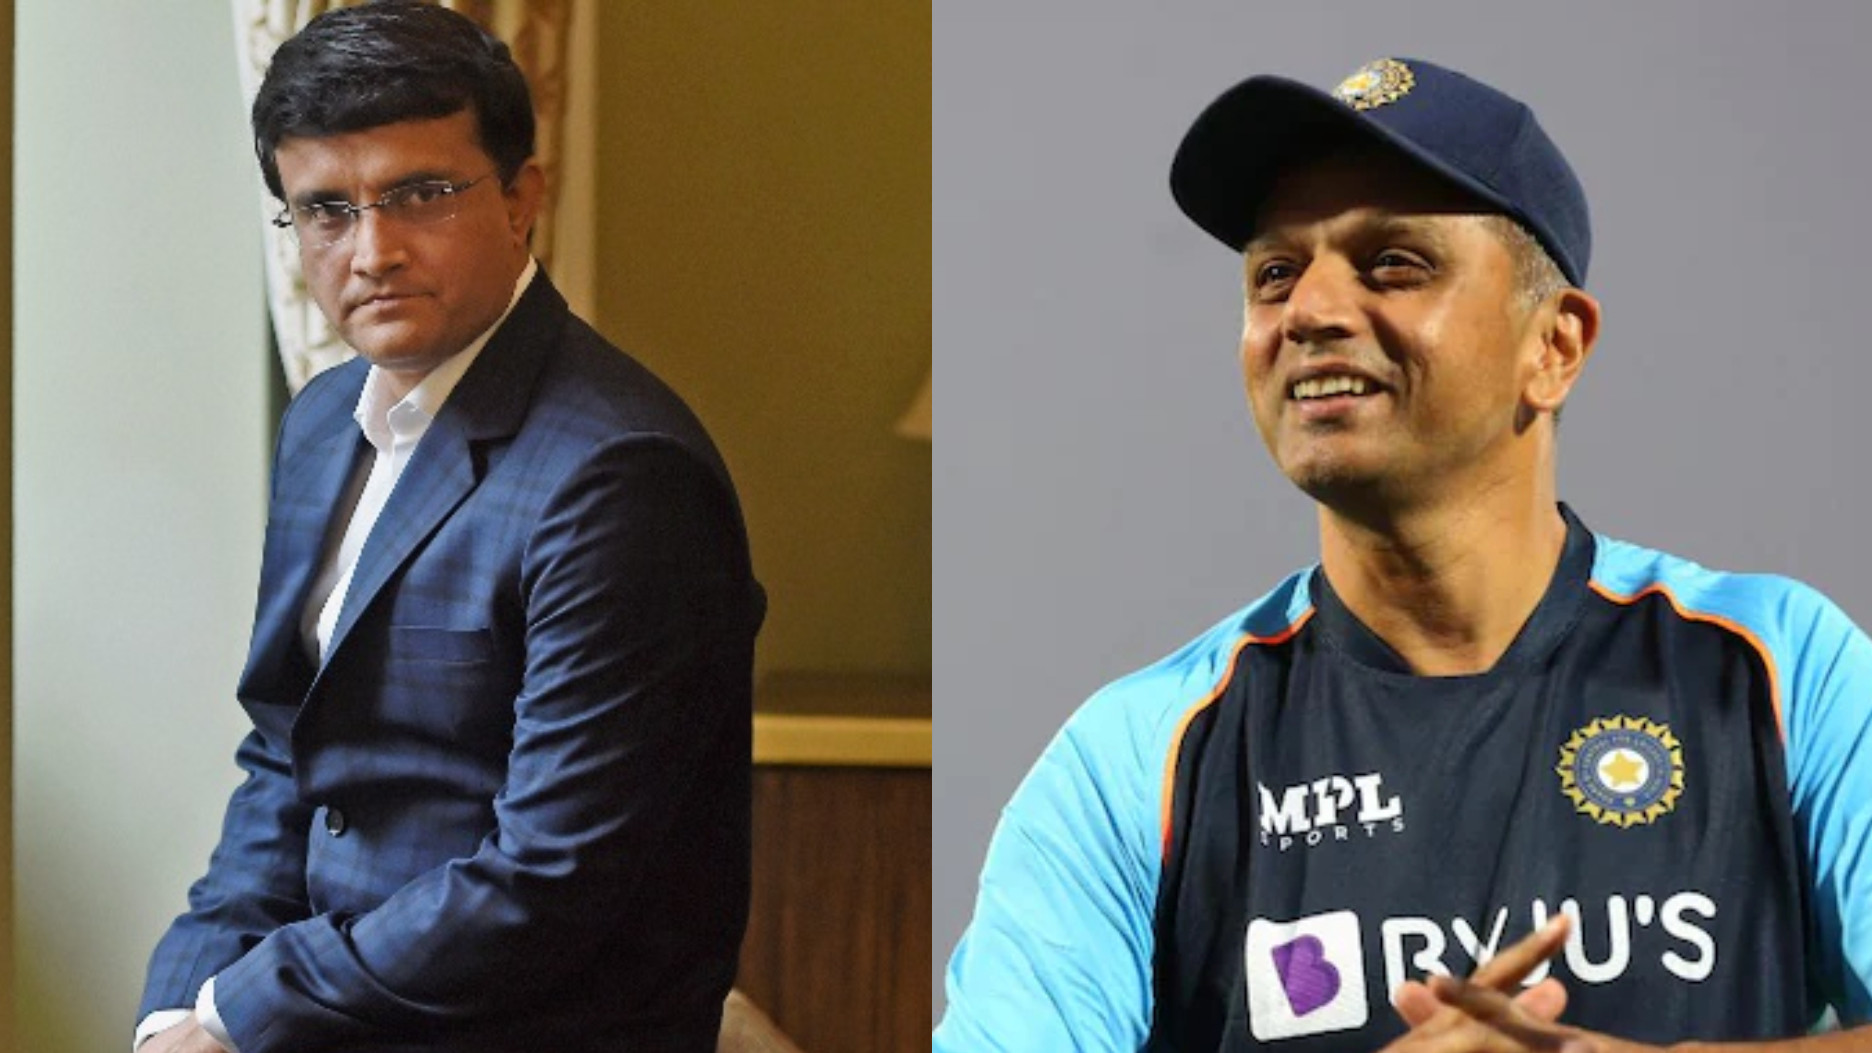 Rahul Dravid will do a remarkable job as Indian team coach, says Sourav Ganguly